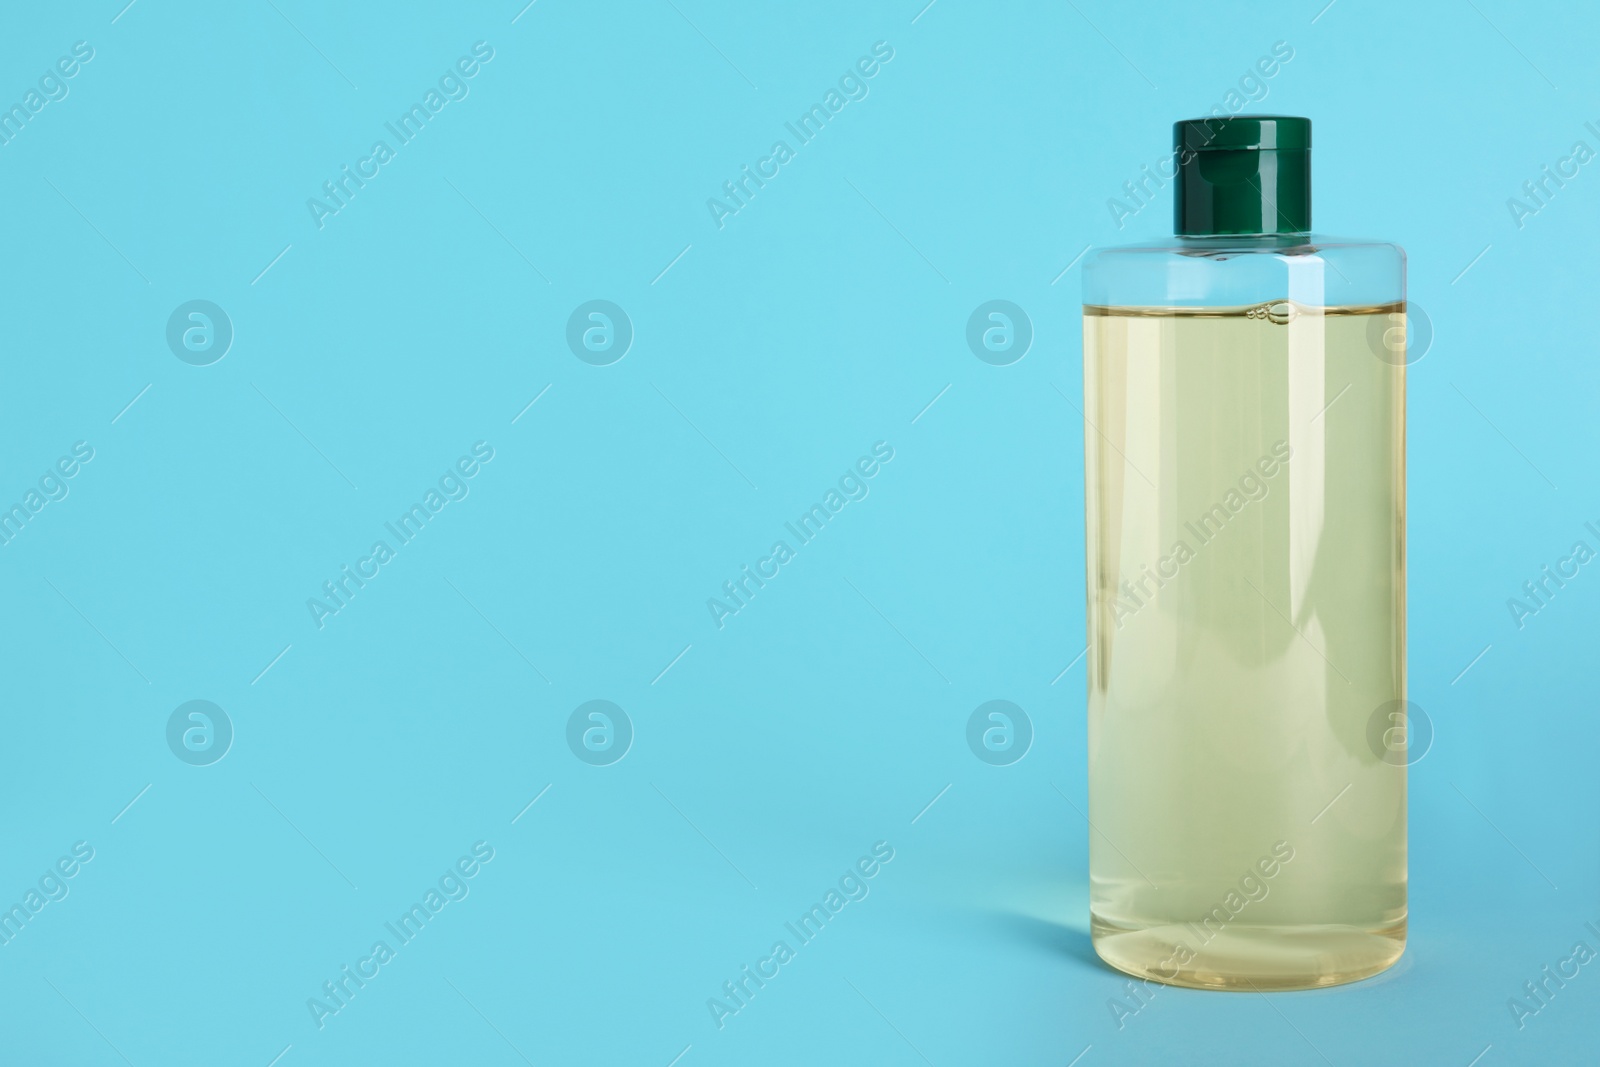 Photo of Bottle of micellar water on light blue background. Space for text